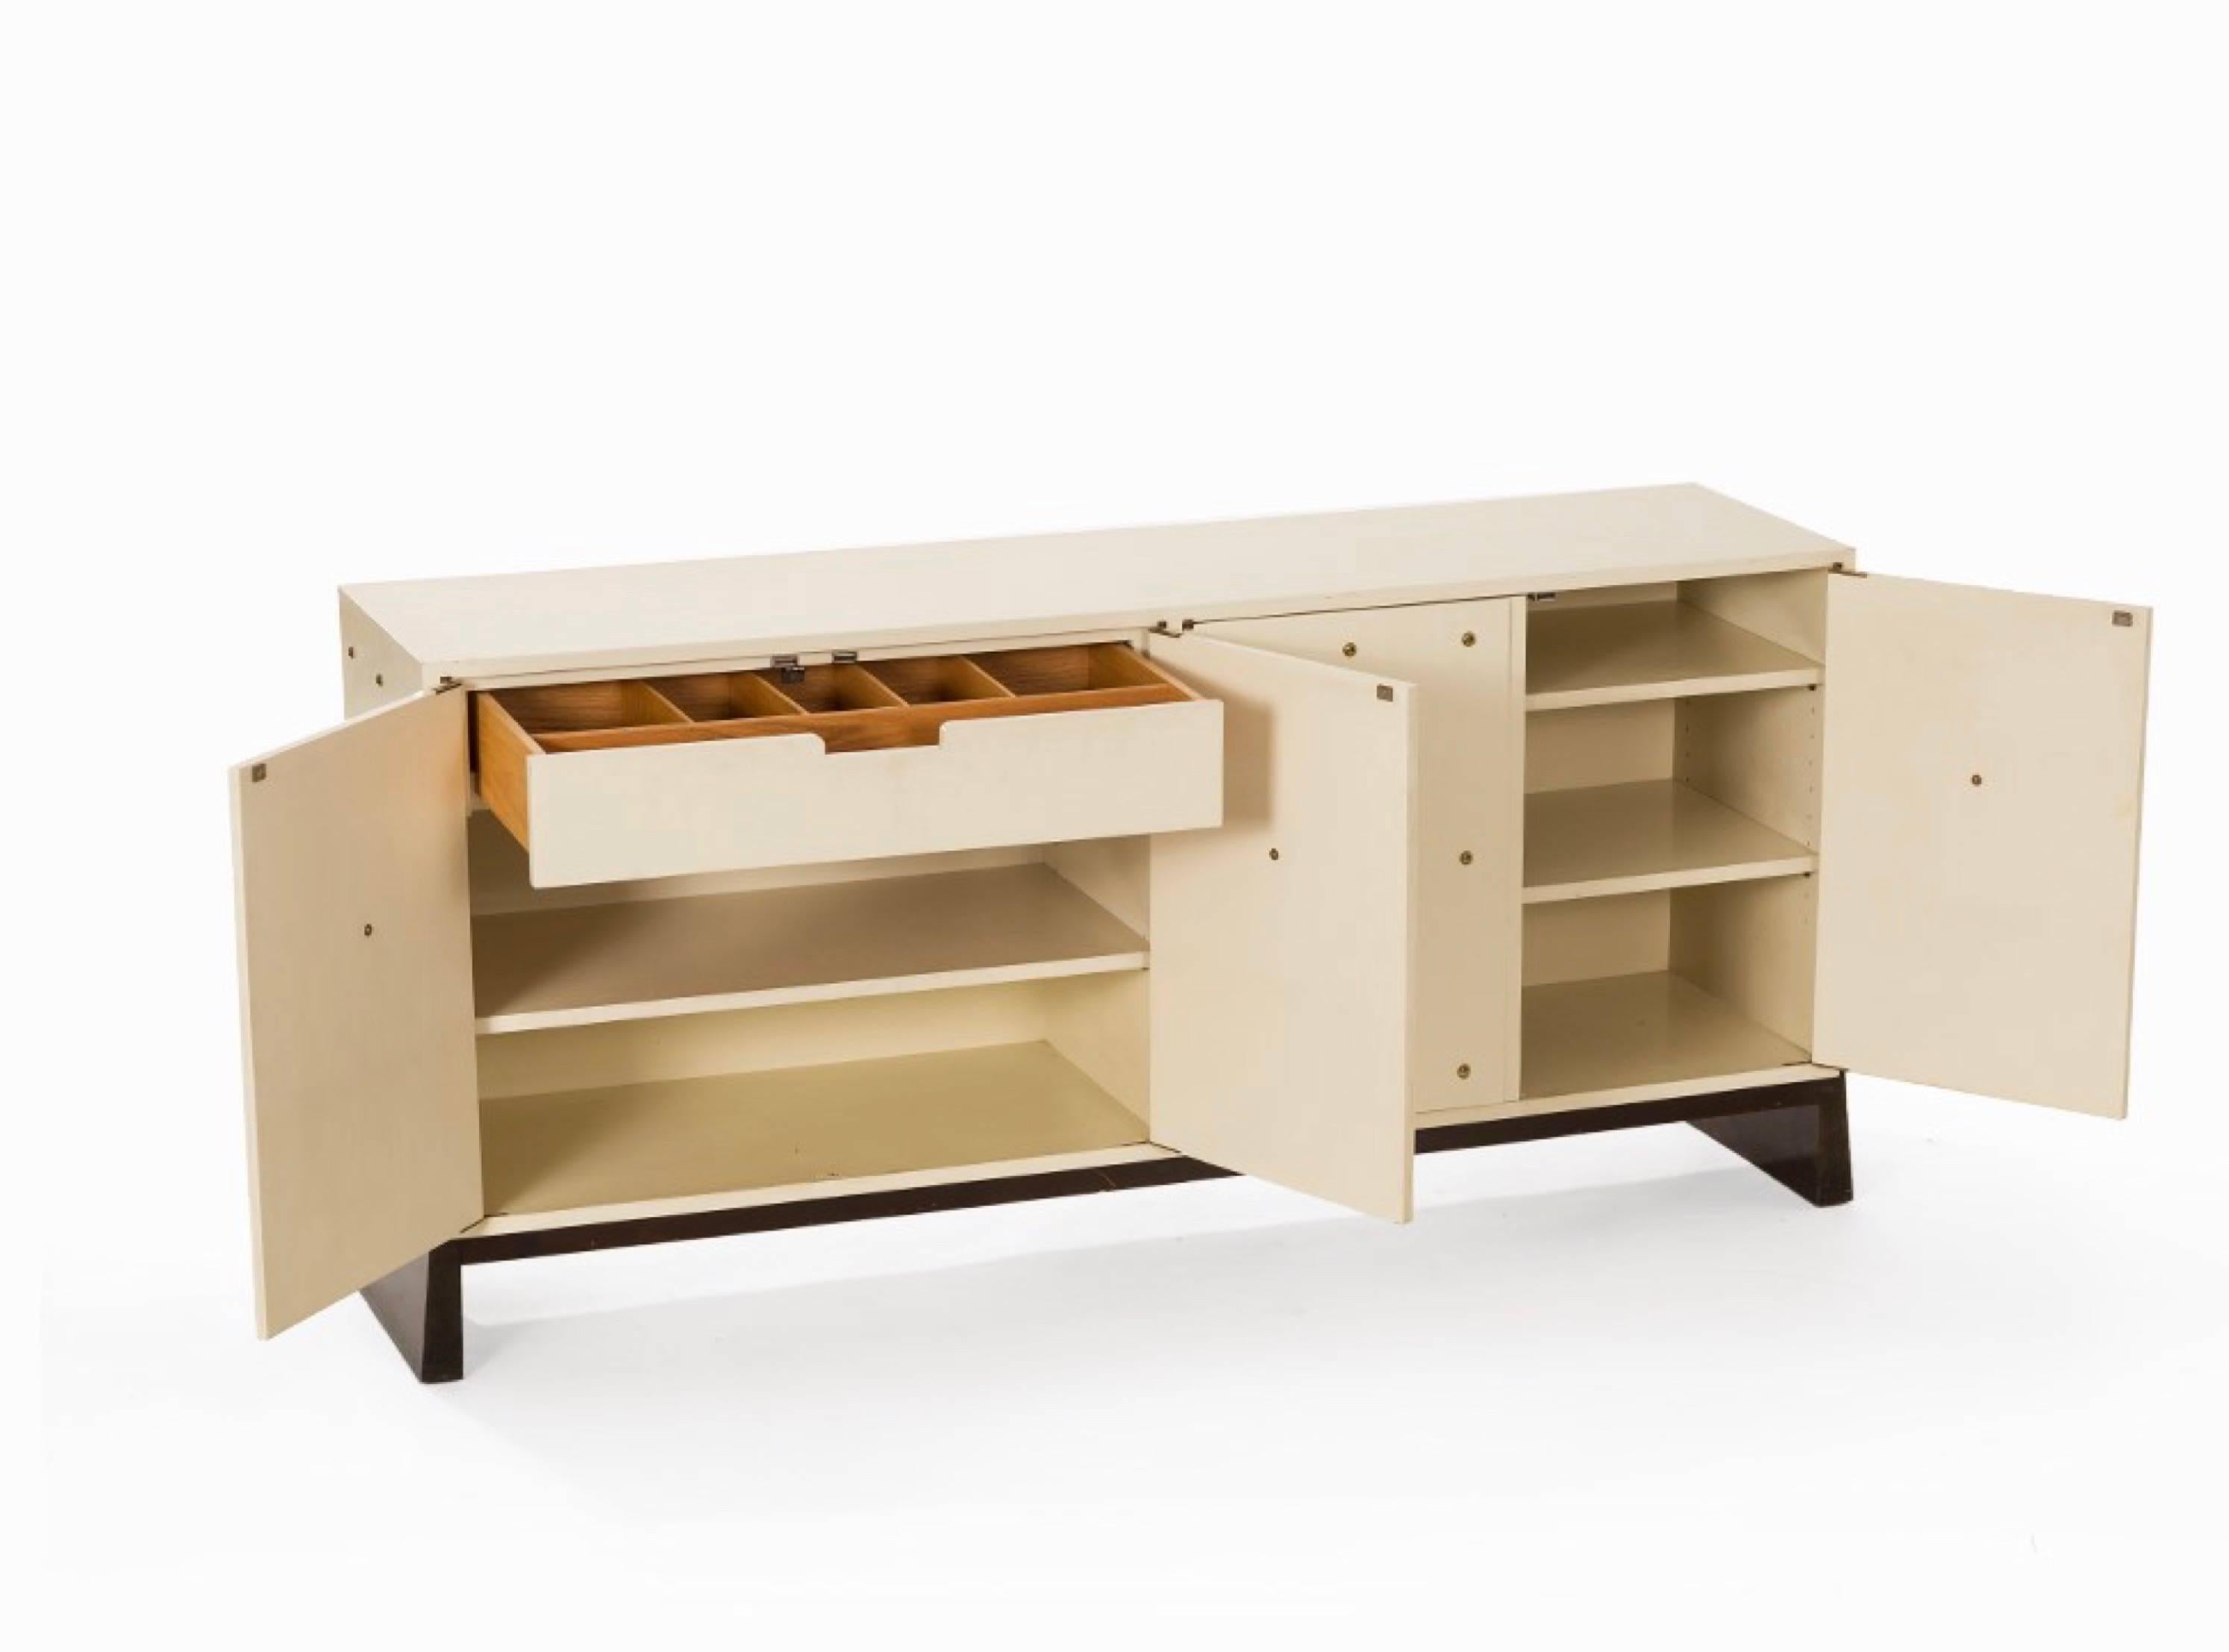 Iconic studded white sideboard by Tommi Parzinger for Parzigner Originals. This model features four doors with adjustable shelves as well as a felt-lined interior drawer. Brand signed in that drawer.
  